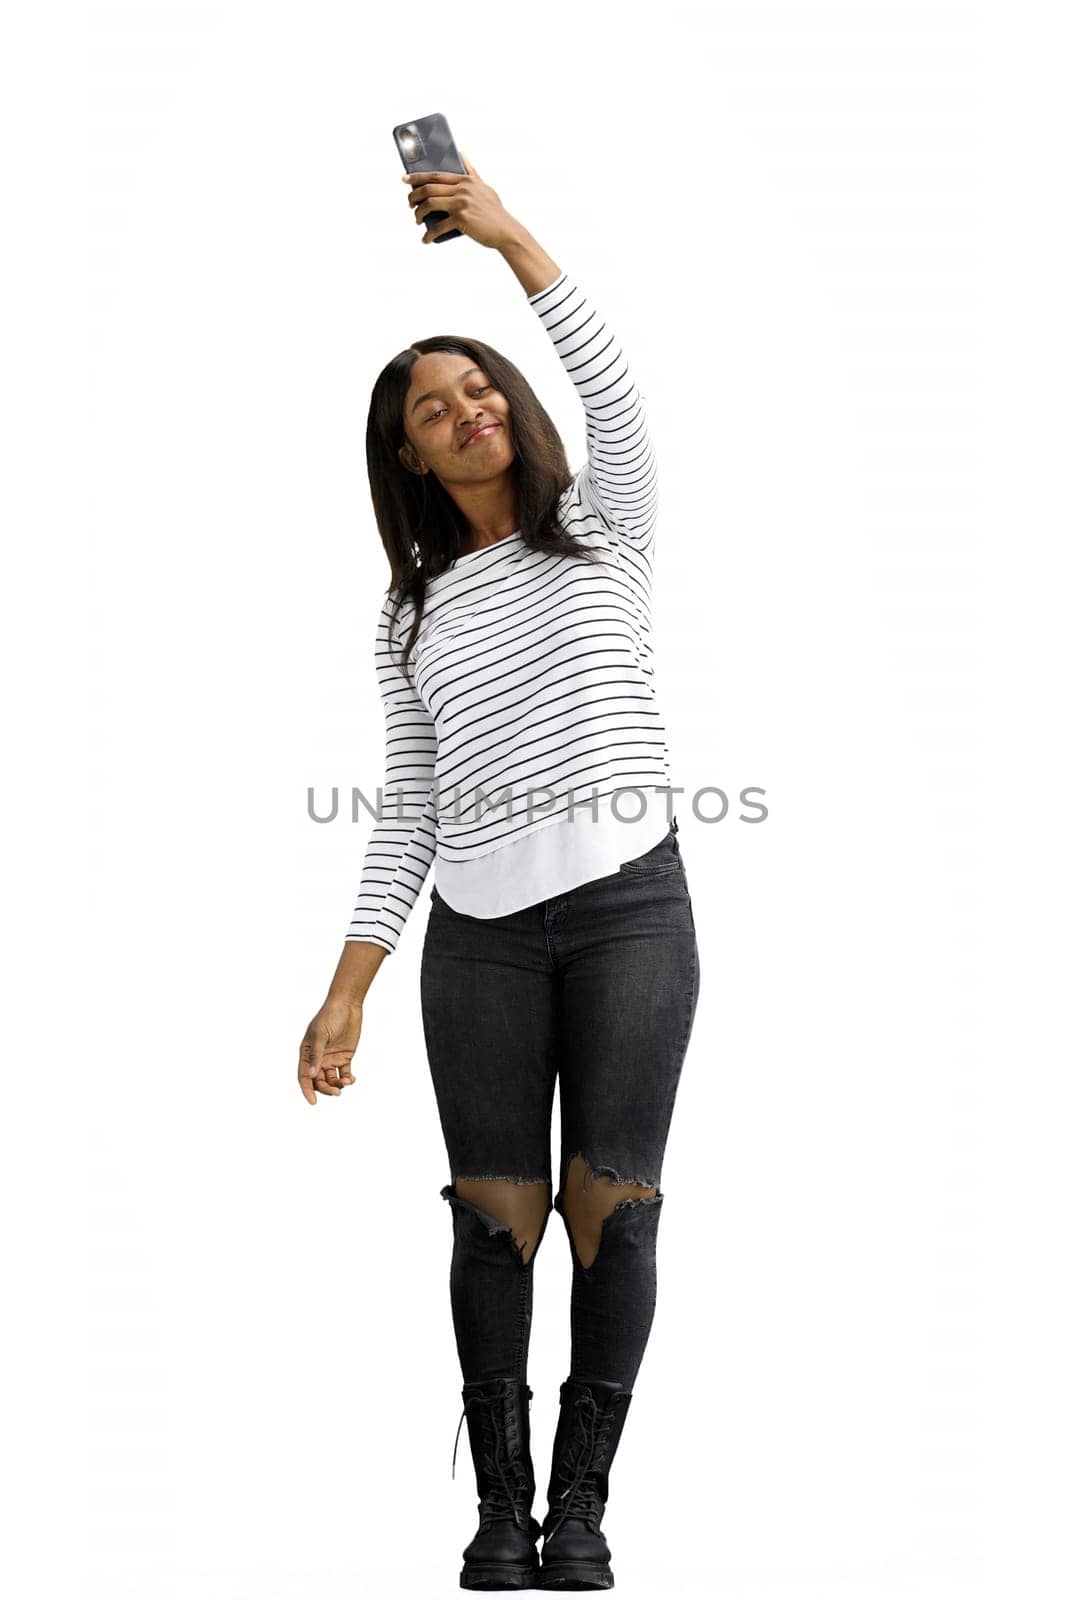 A woman, on a white background, in full height, waving her phone.